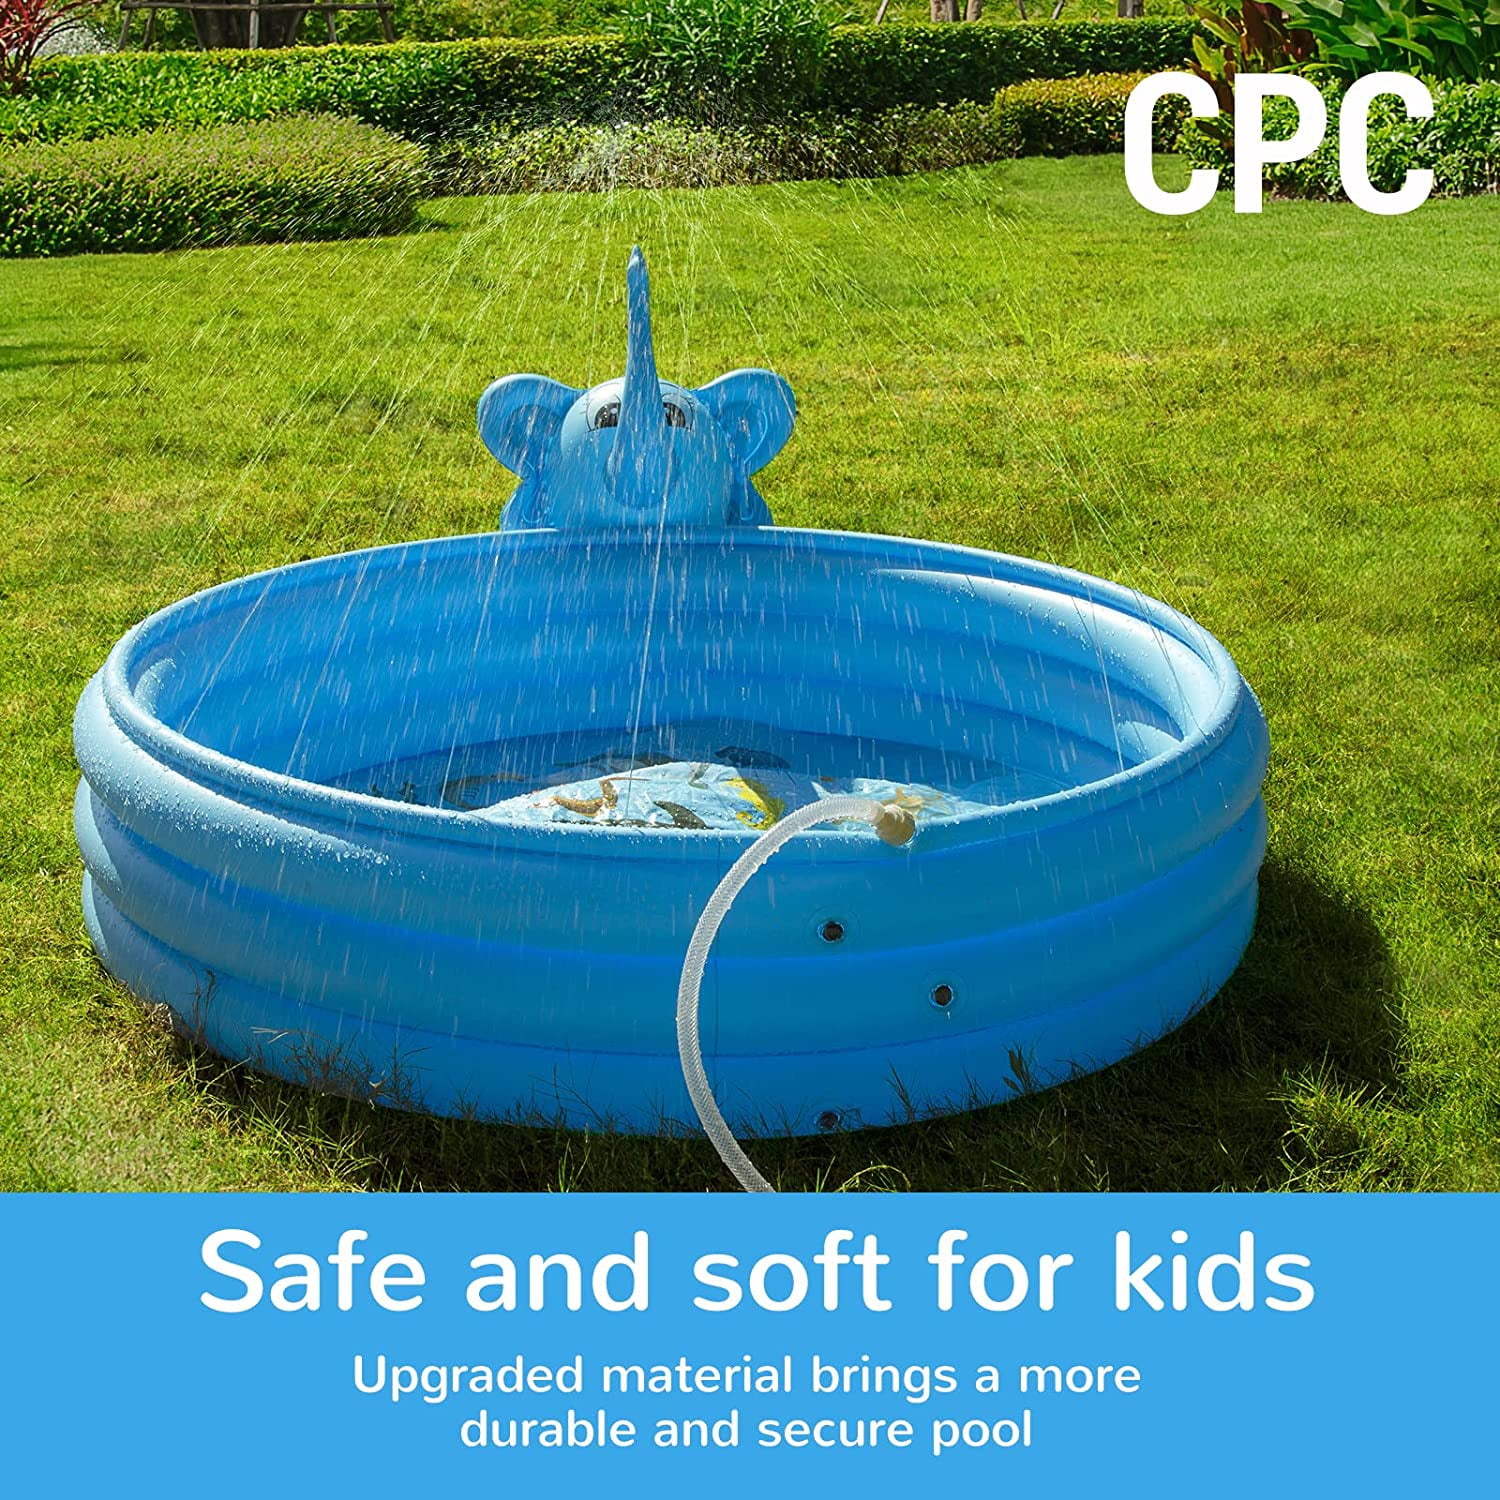 Party Garden 50”X12” 2-in-1 Elephant Small Pool for Backyard 3 Rings Round Splash Above Ground Baby Ball Pit Pool for Kid Age 3+ Blue Inflatable Swimming Pool Ingbelle Kiddie Pool 